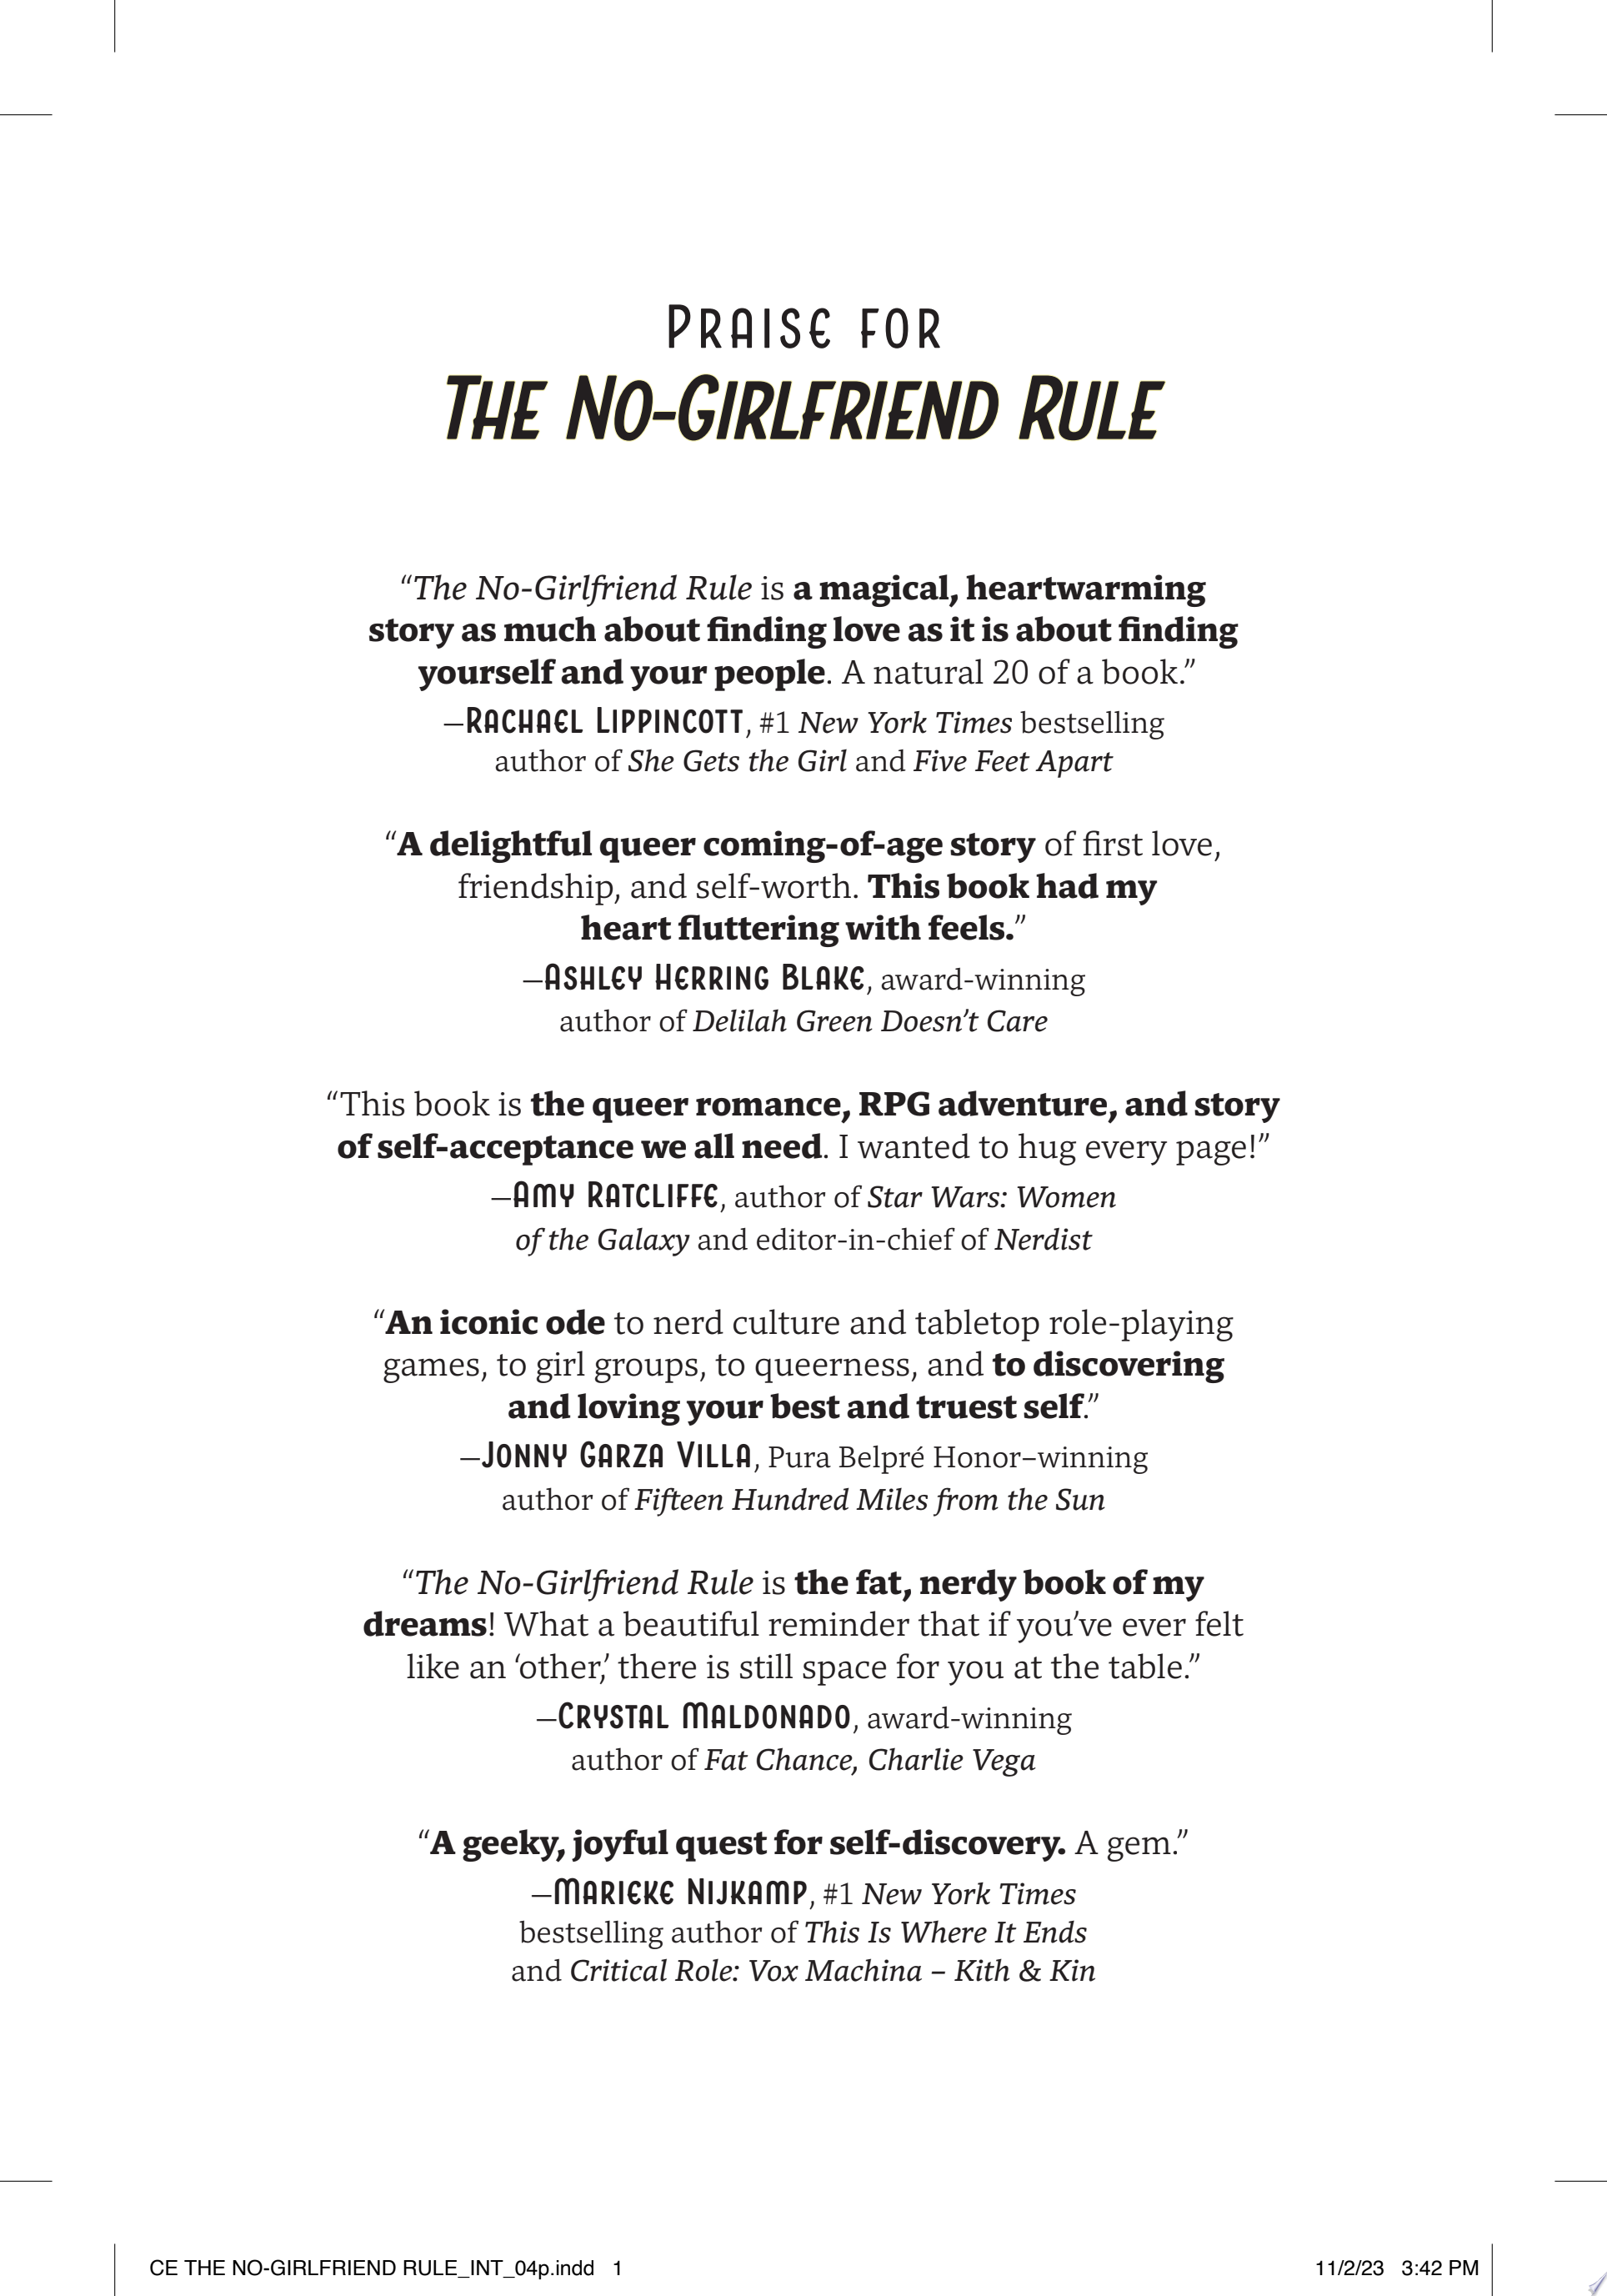 Image for "The No-Girlfriend Rule"